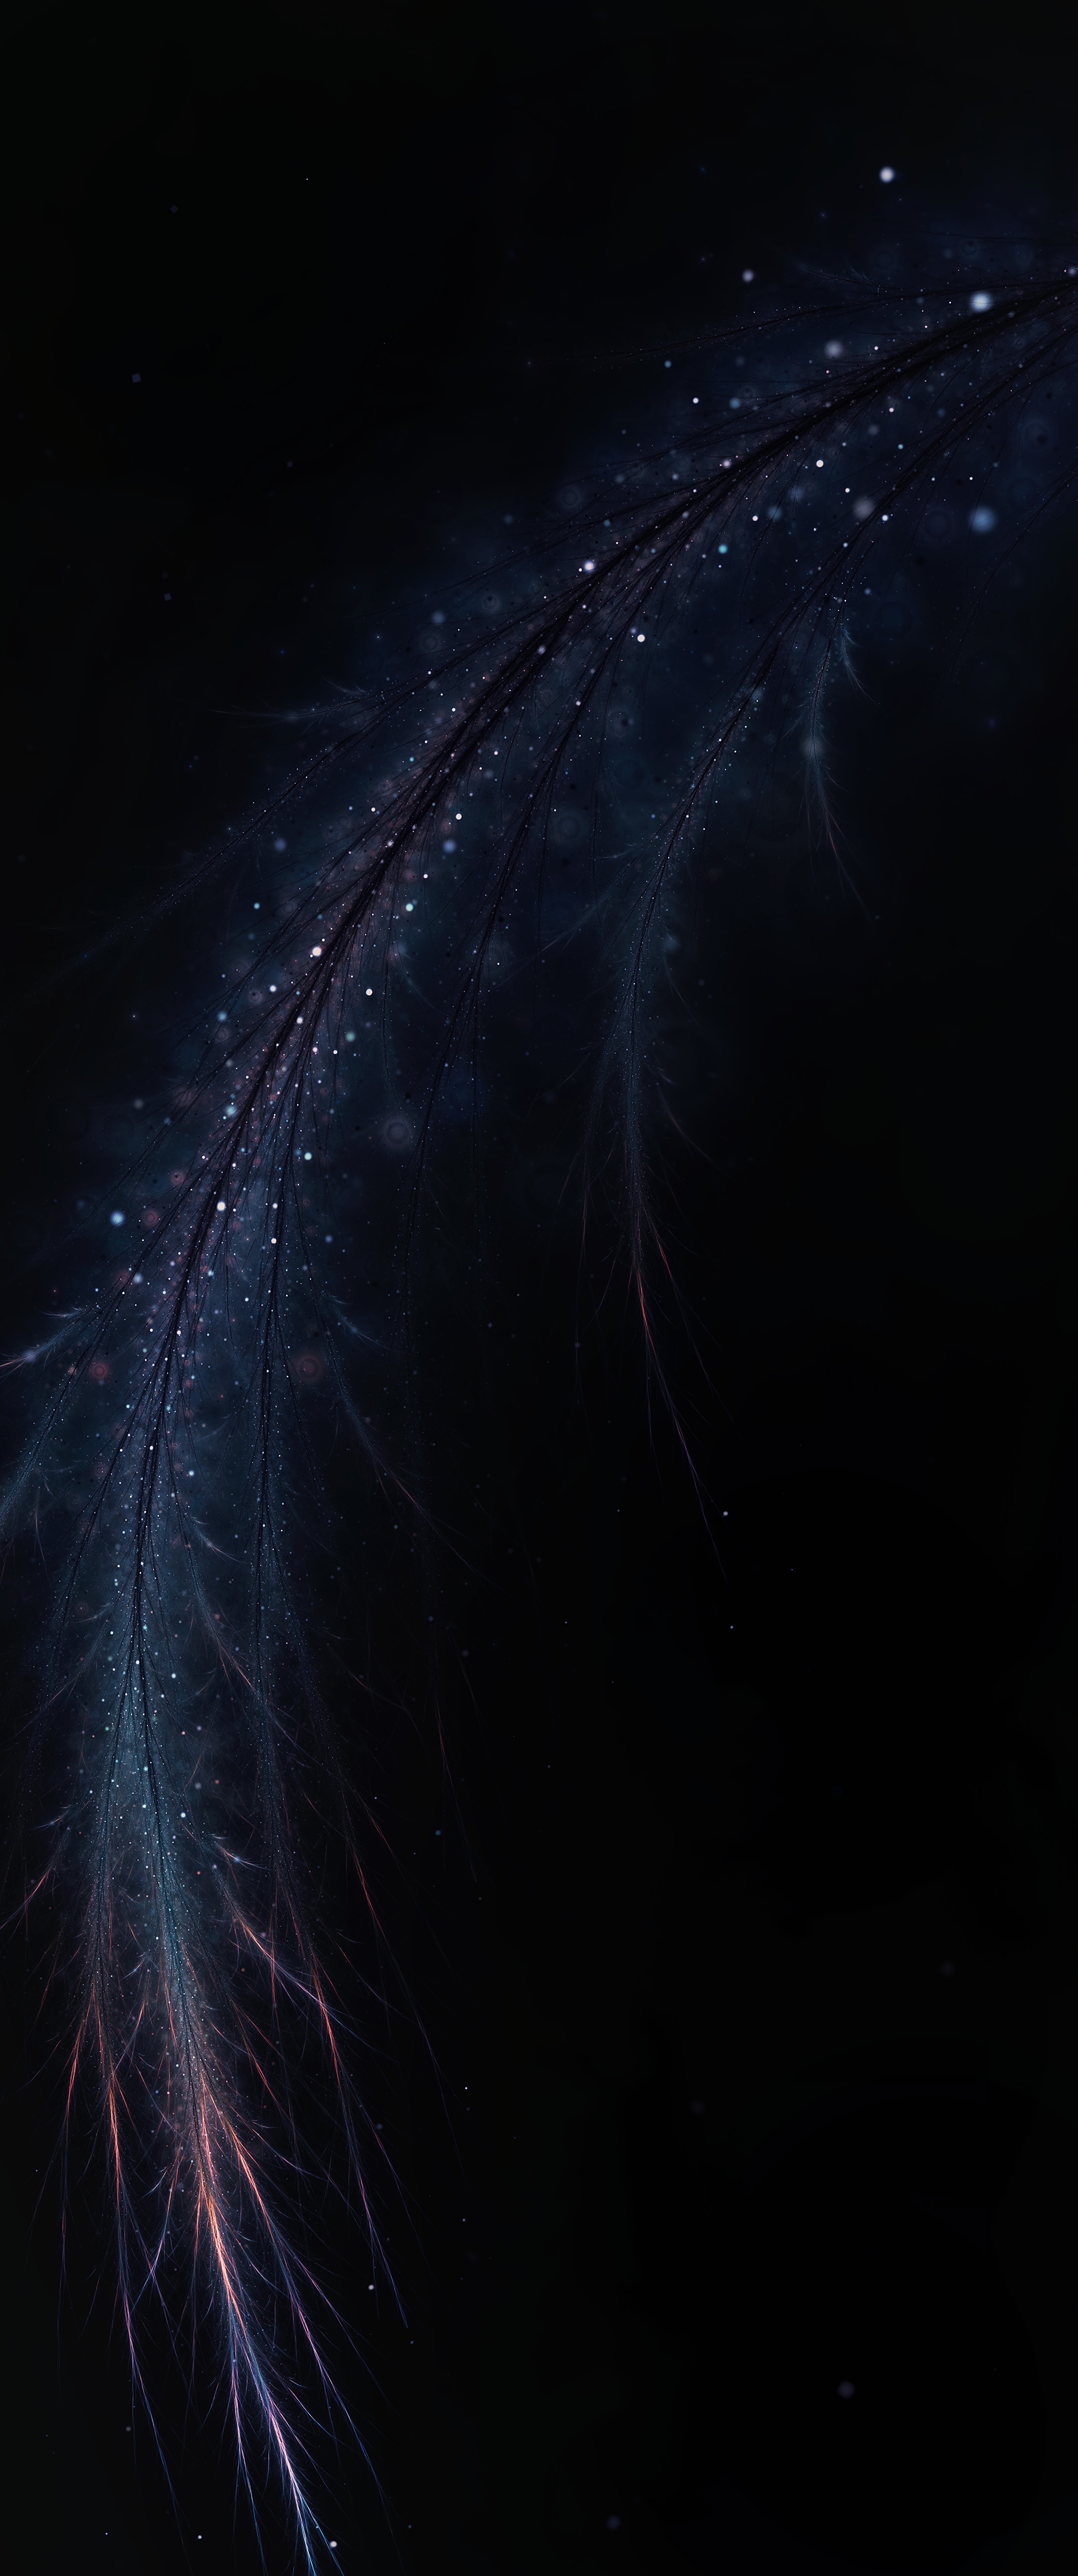 dark, abstract, feather, fractal, shine, brilliance, branch, pen High Definition image